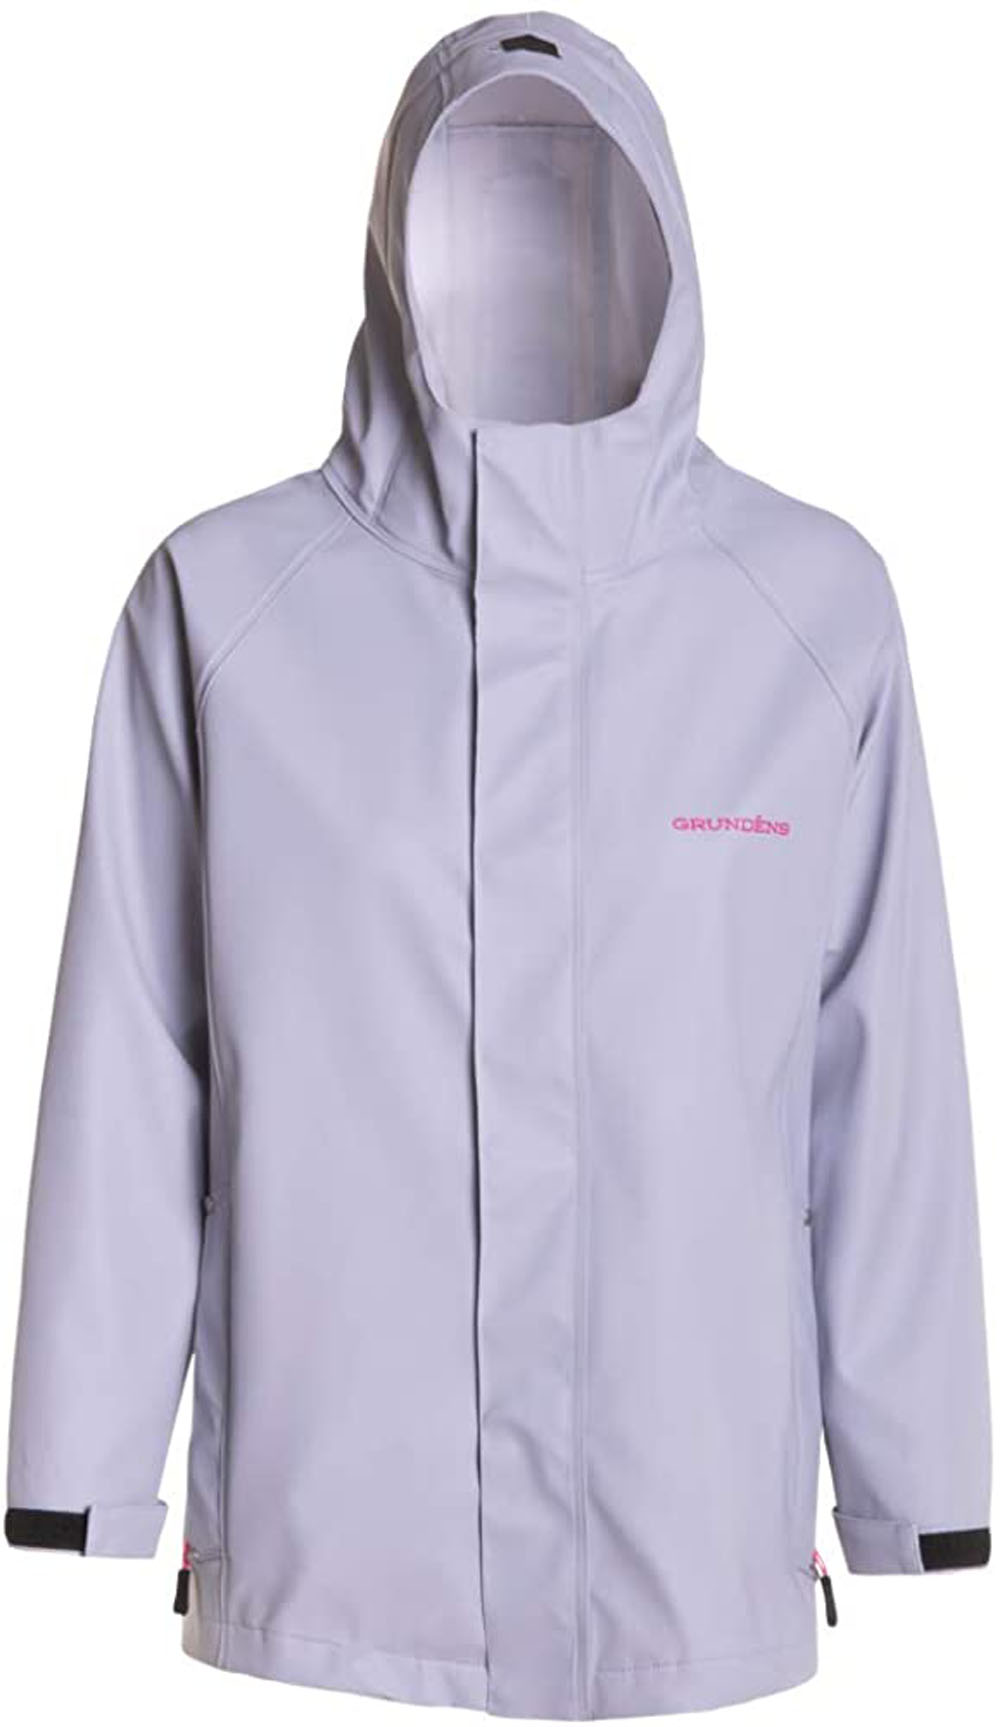 Women's Neptune Jacket in Sky Grey color from the front view